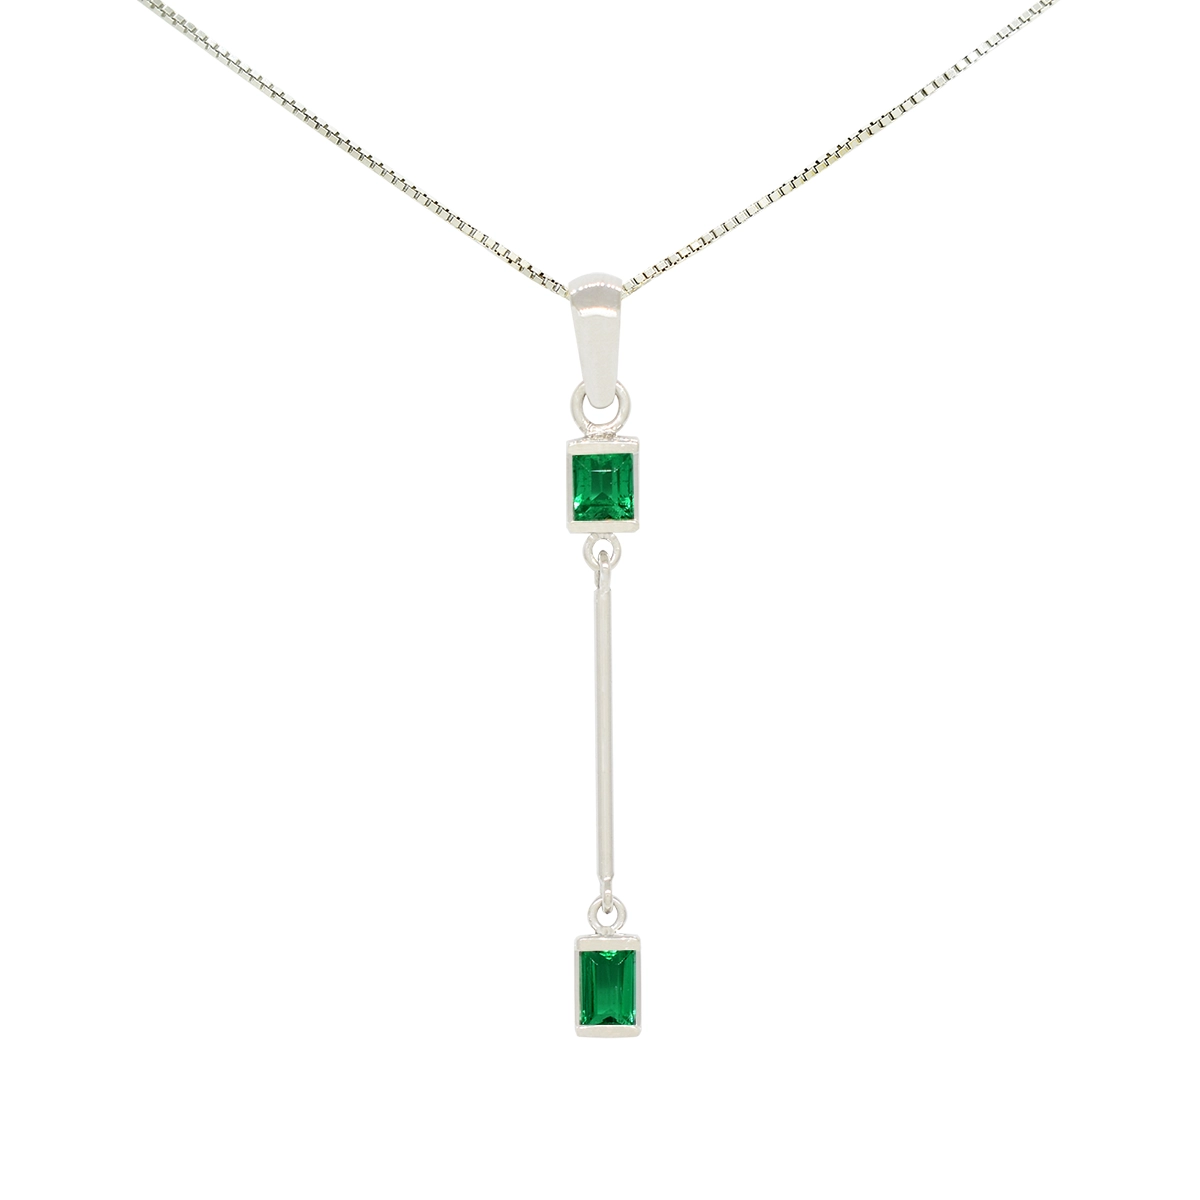 Emerald pendant necklace with 2 baguette cut natural Colombian emeralds in 0.40 Ct. t.w. Set in 18K white gold feminine style